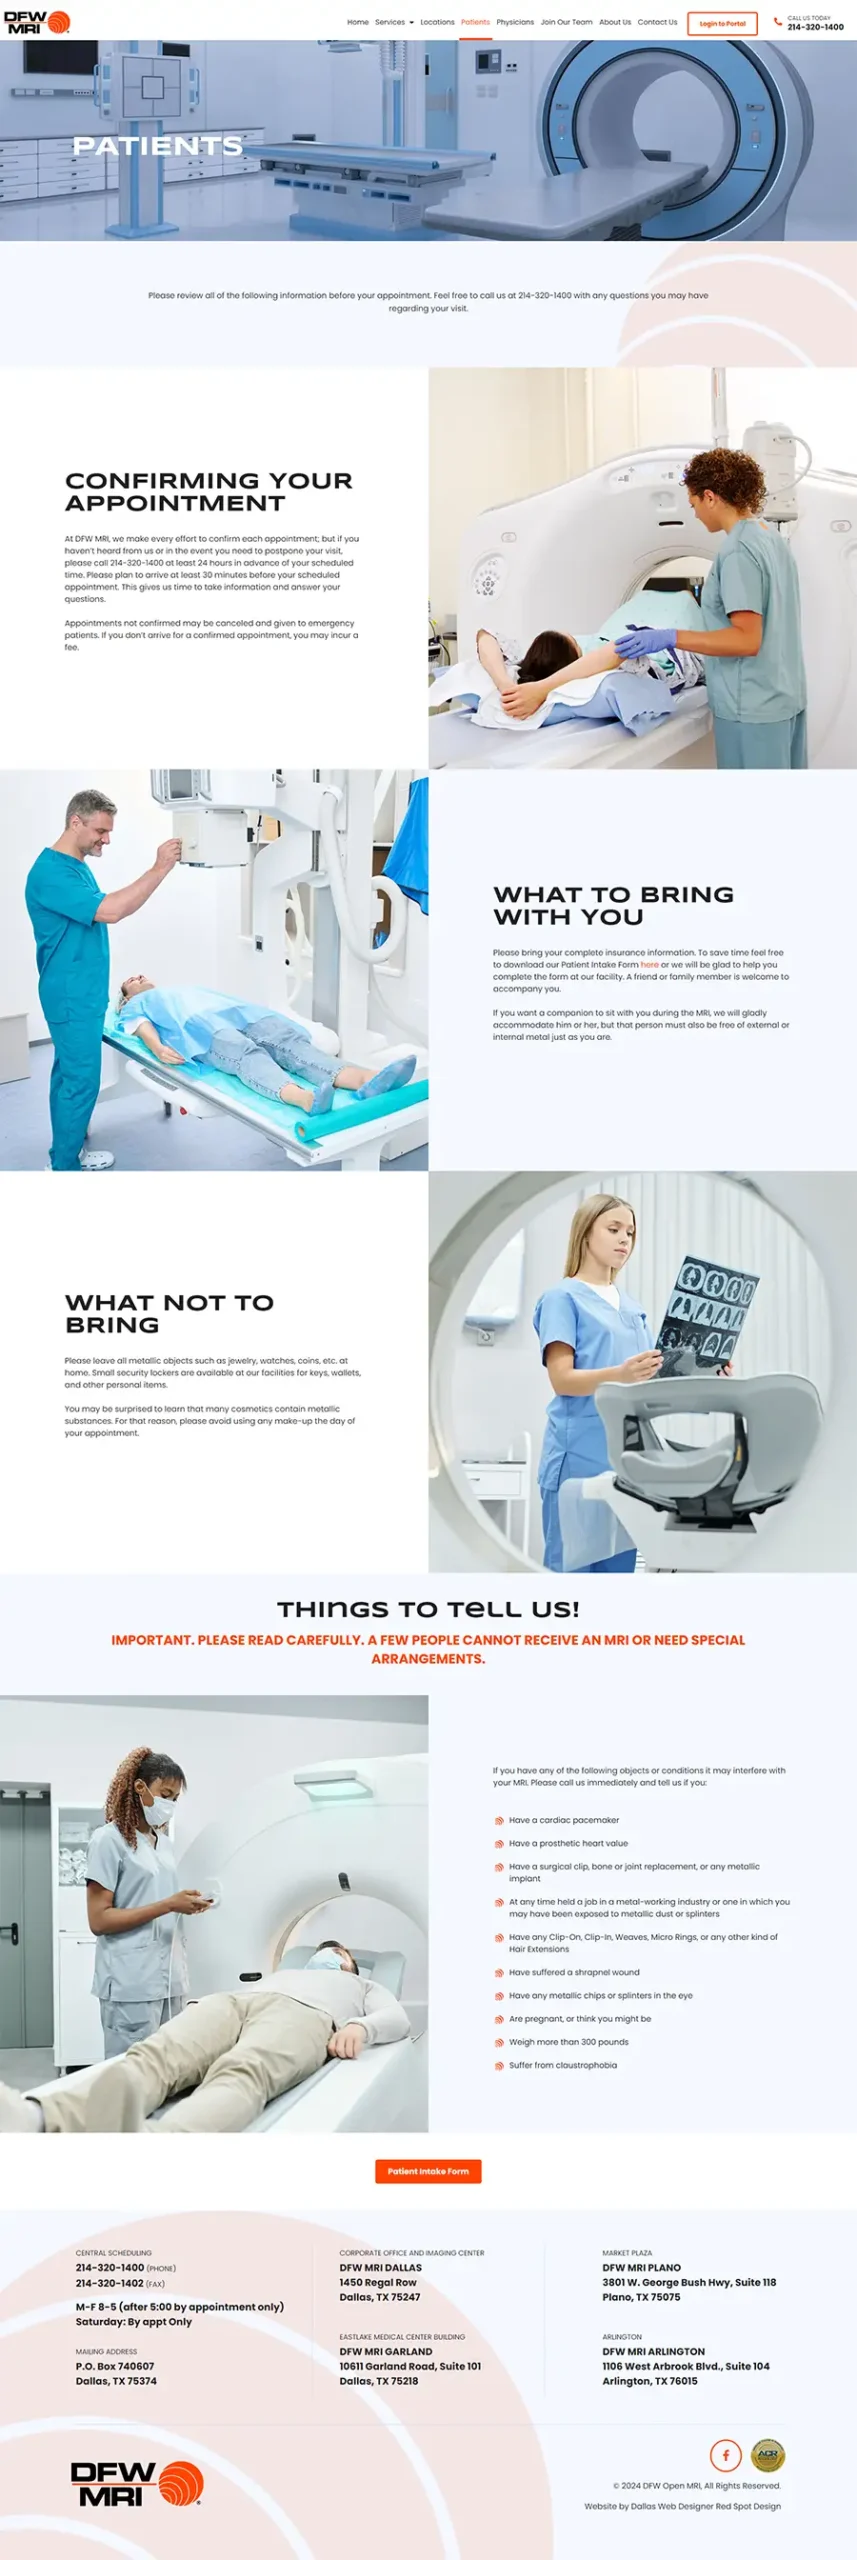 patients page for dfw open mri by red spot design in dallas